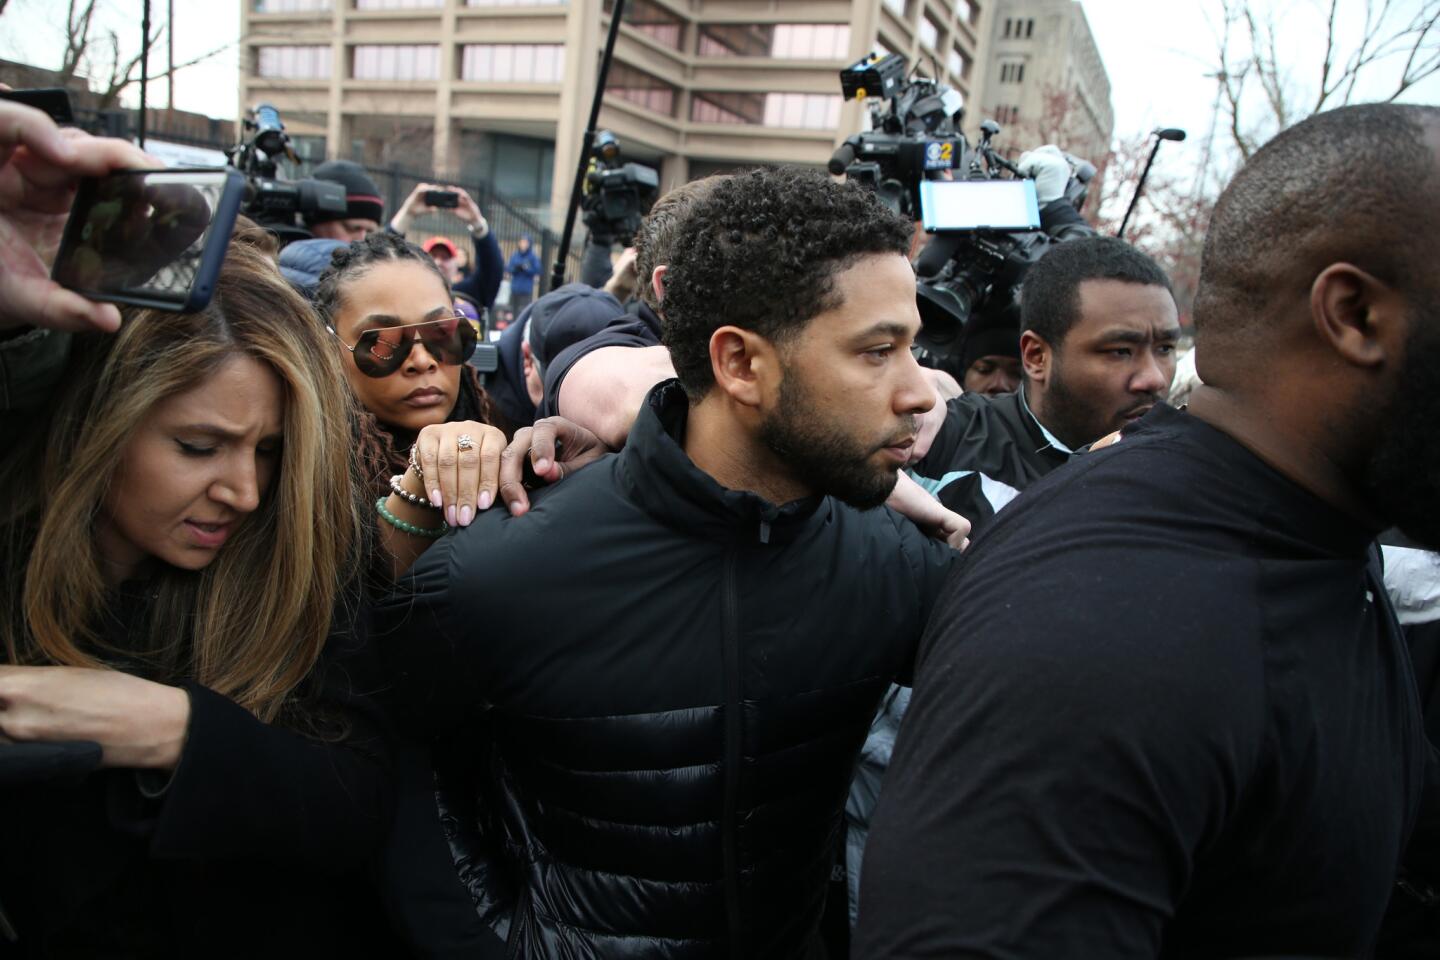 After bonding out, "Empire" television actor Jussie Smollett leaves the Cook County Jail in Chicago, Feb. 21, 2019.